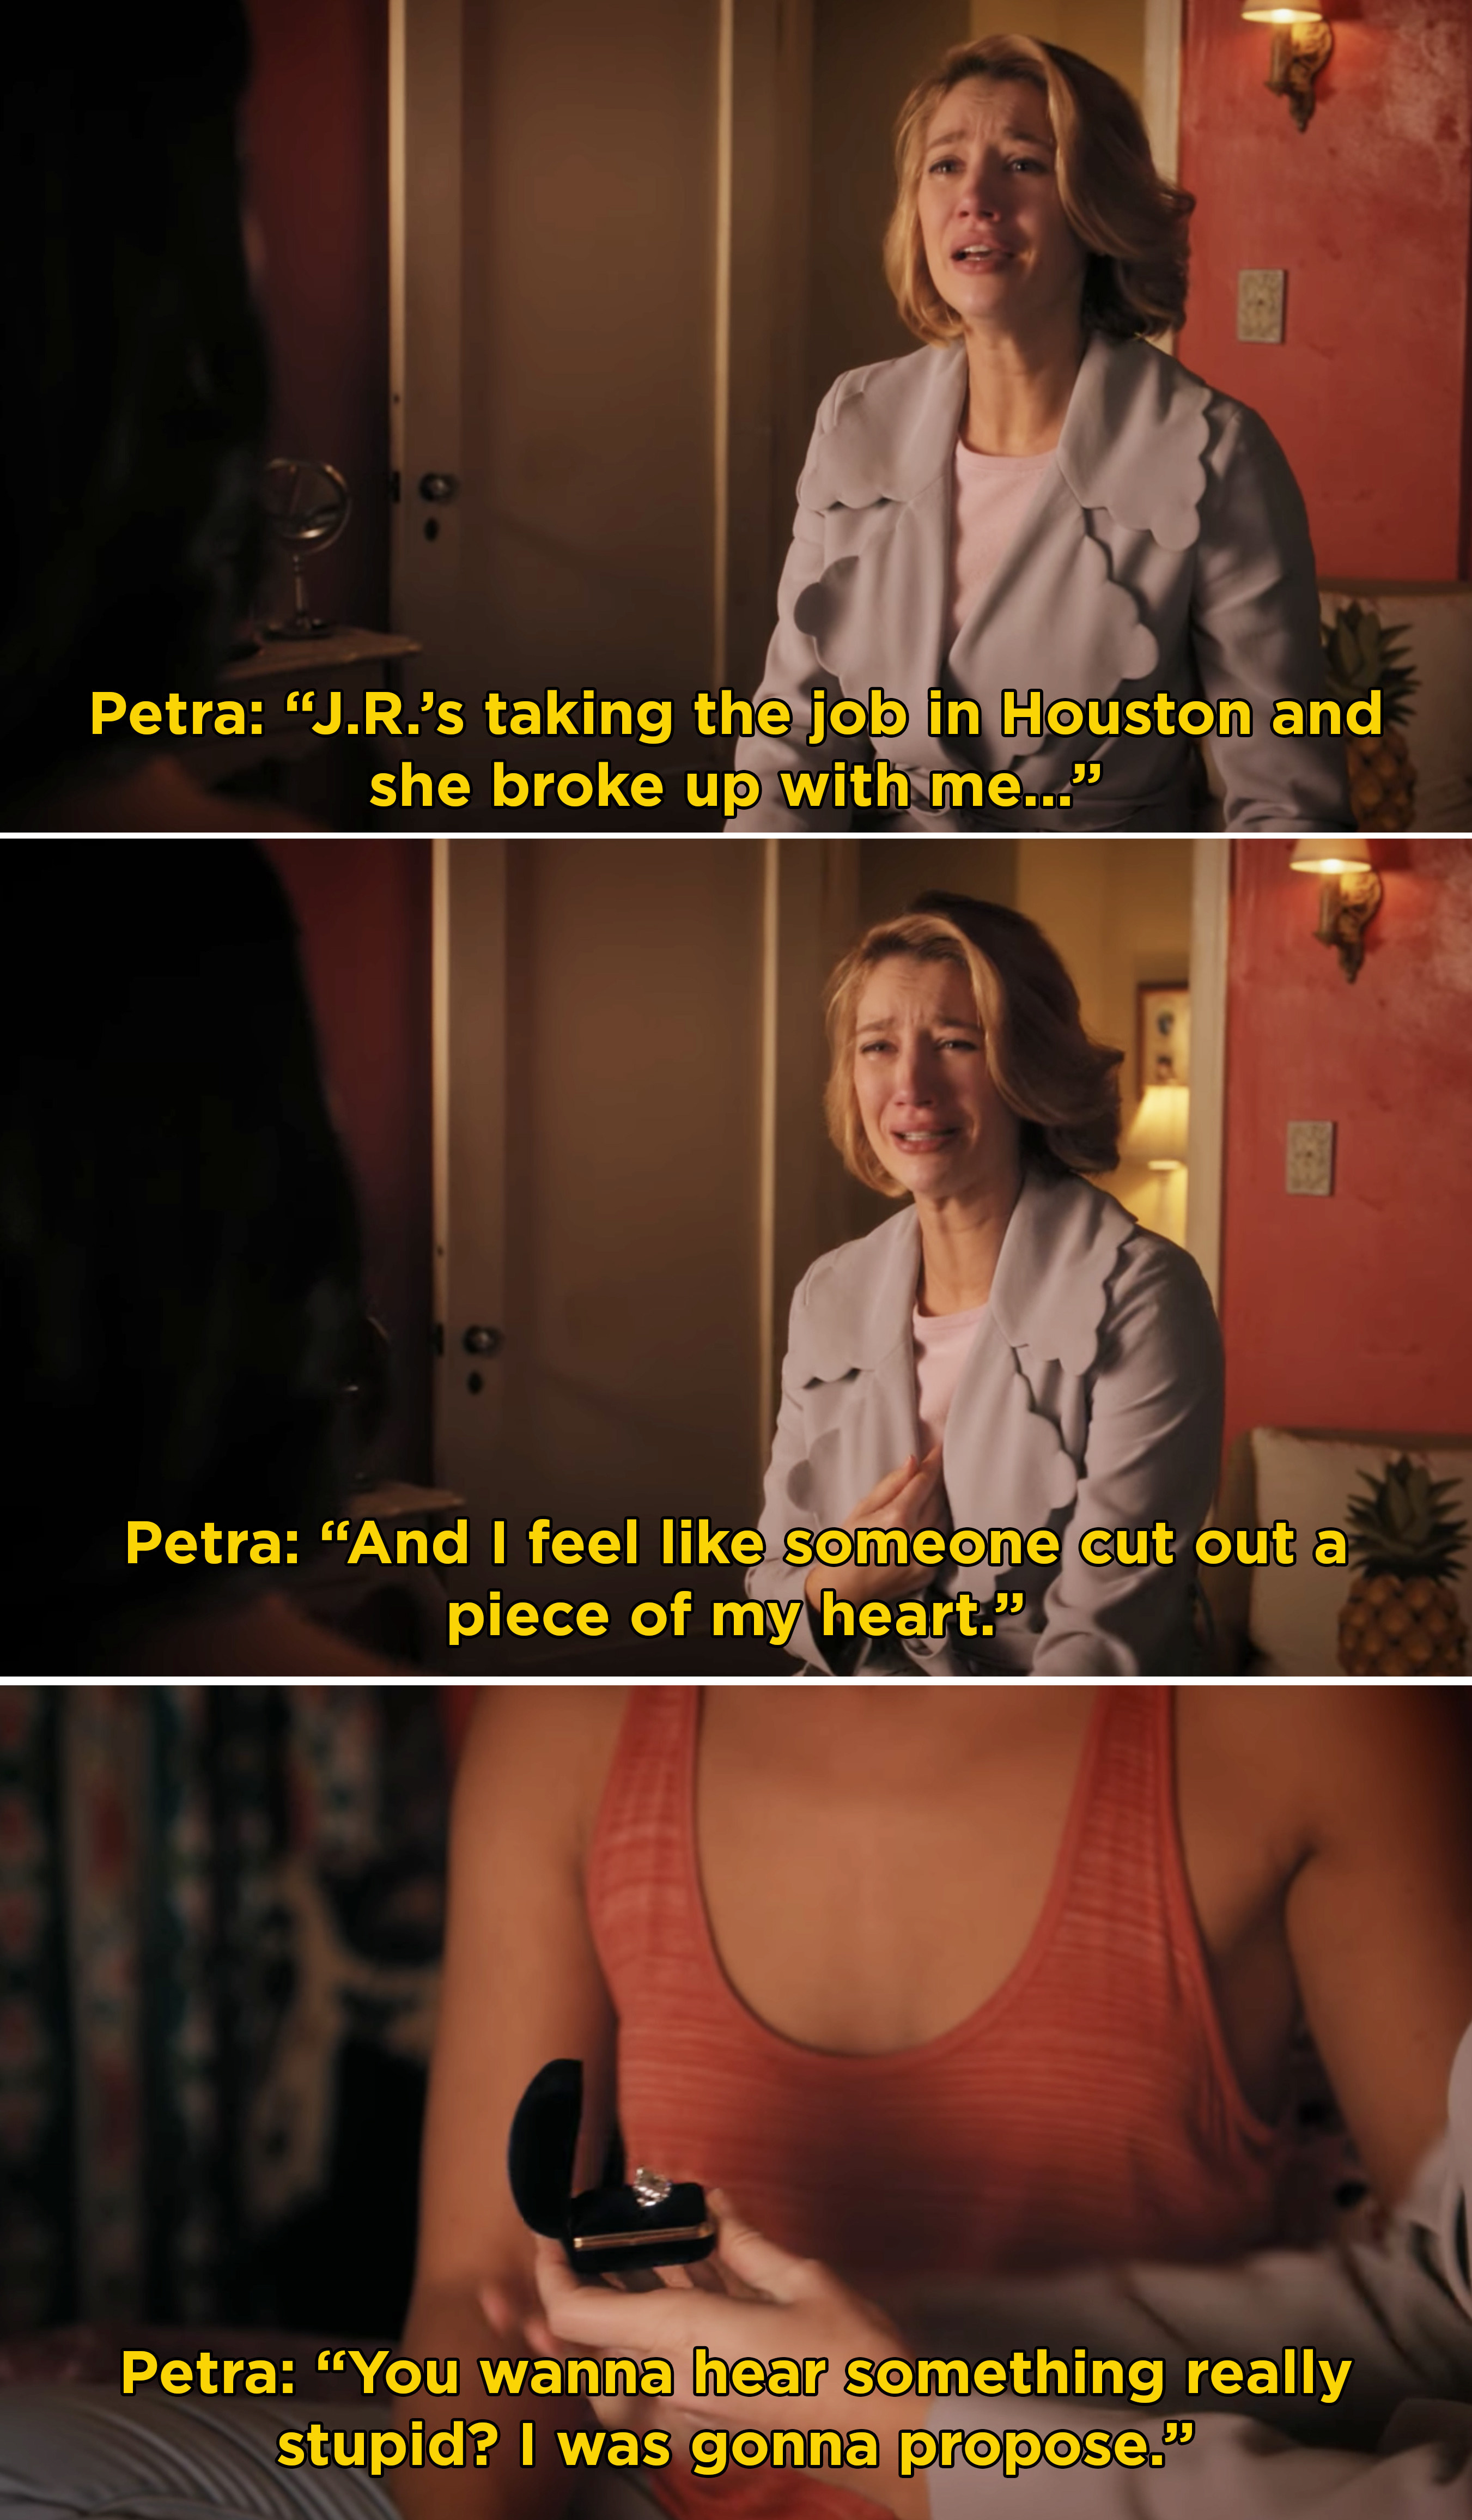 Petra sobbing about JR broke up with her even though she was about to propose